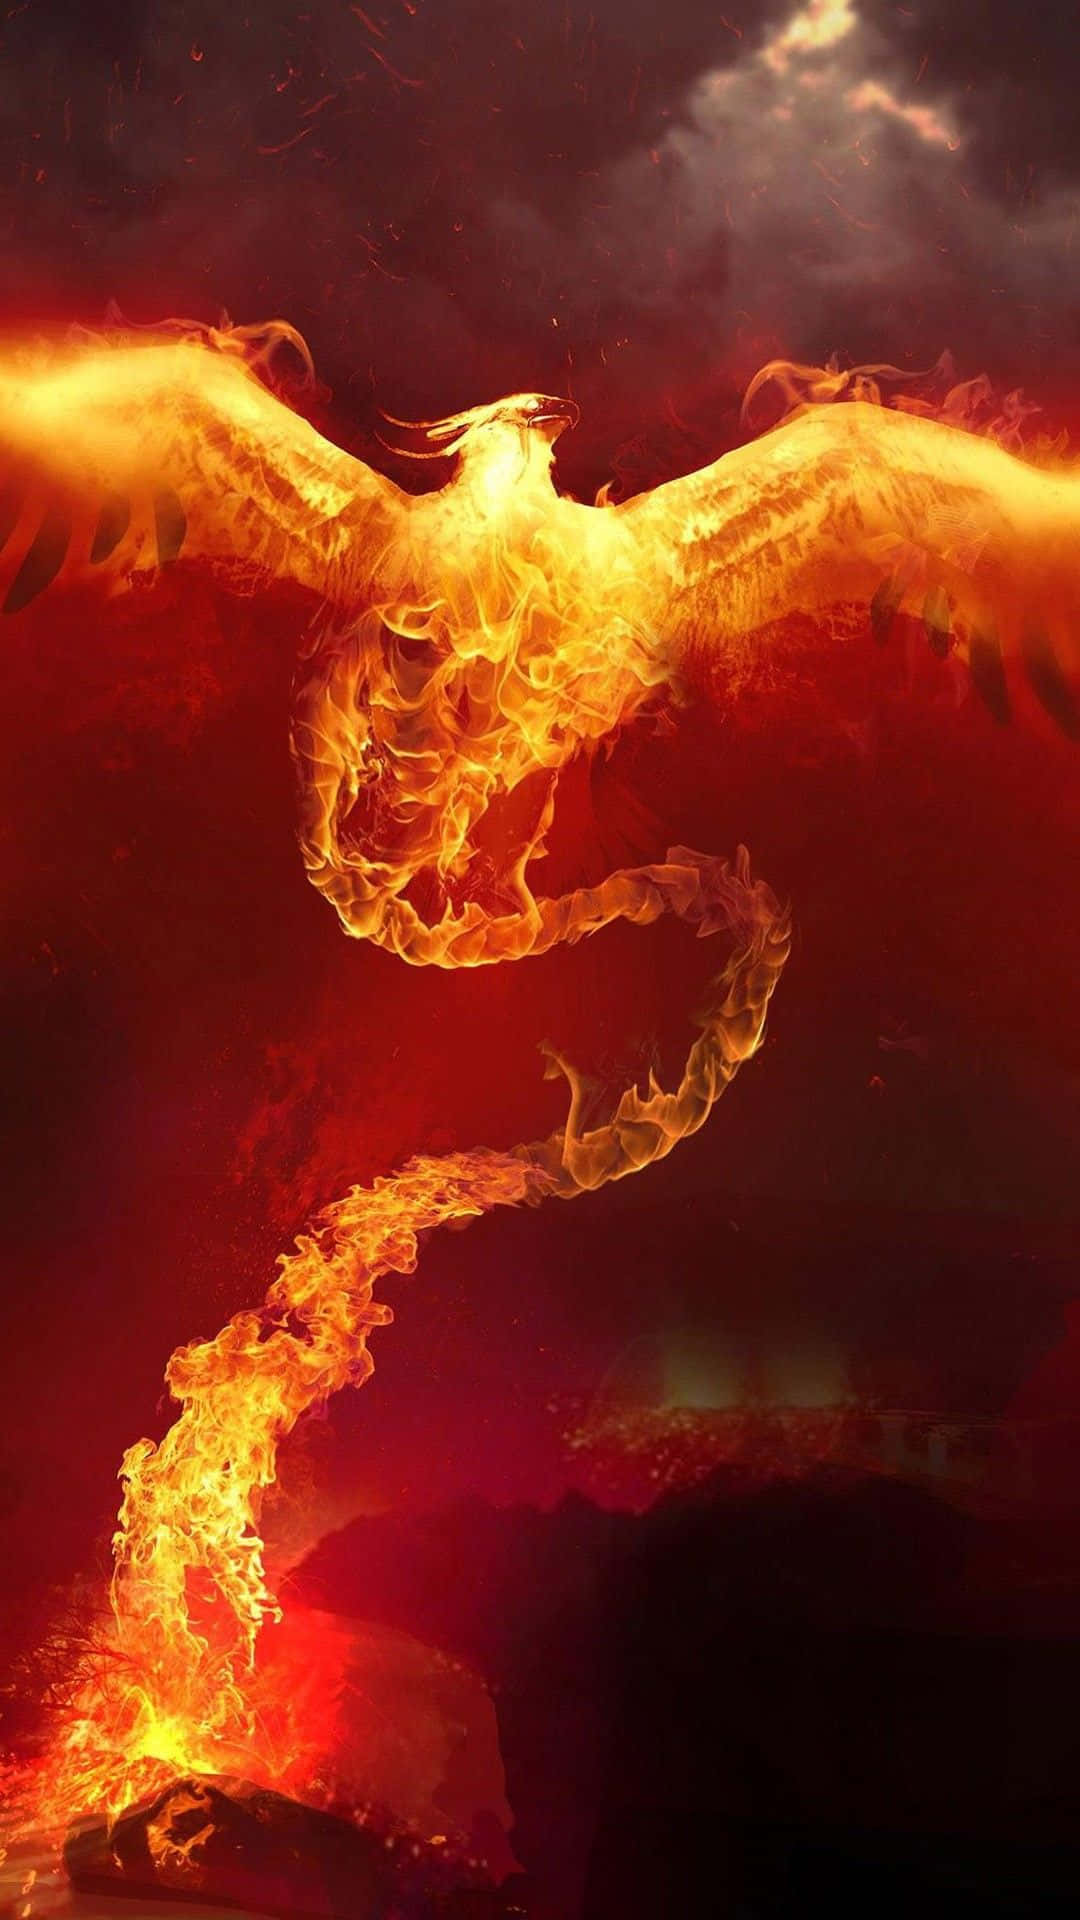 Discover the magic and mystery of Phoenix